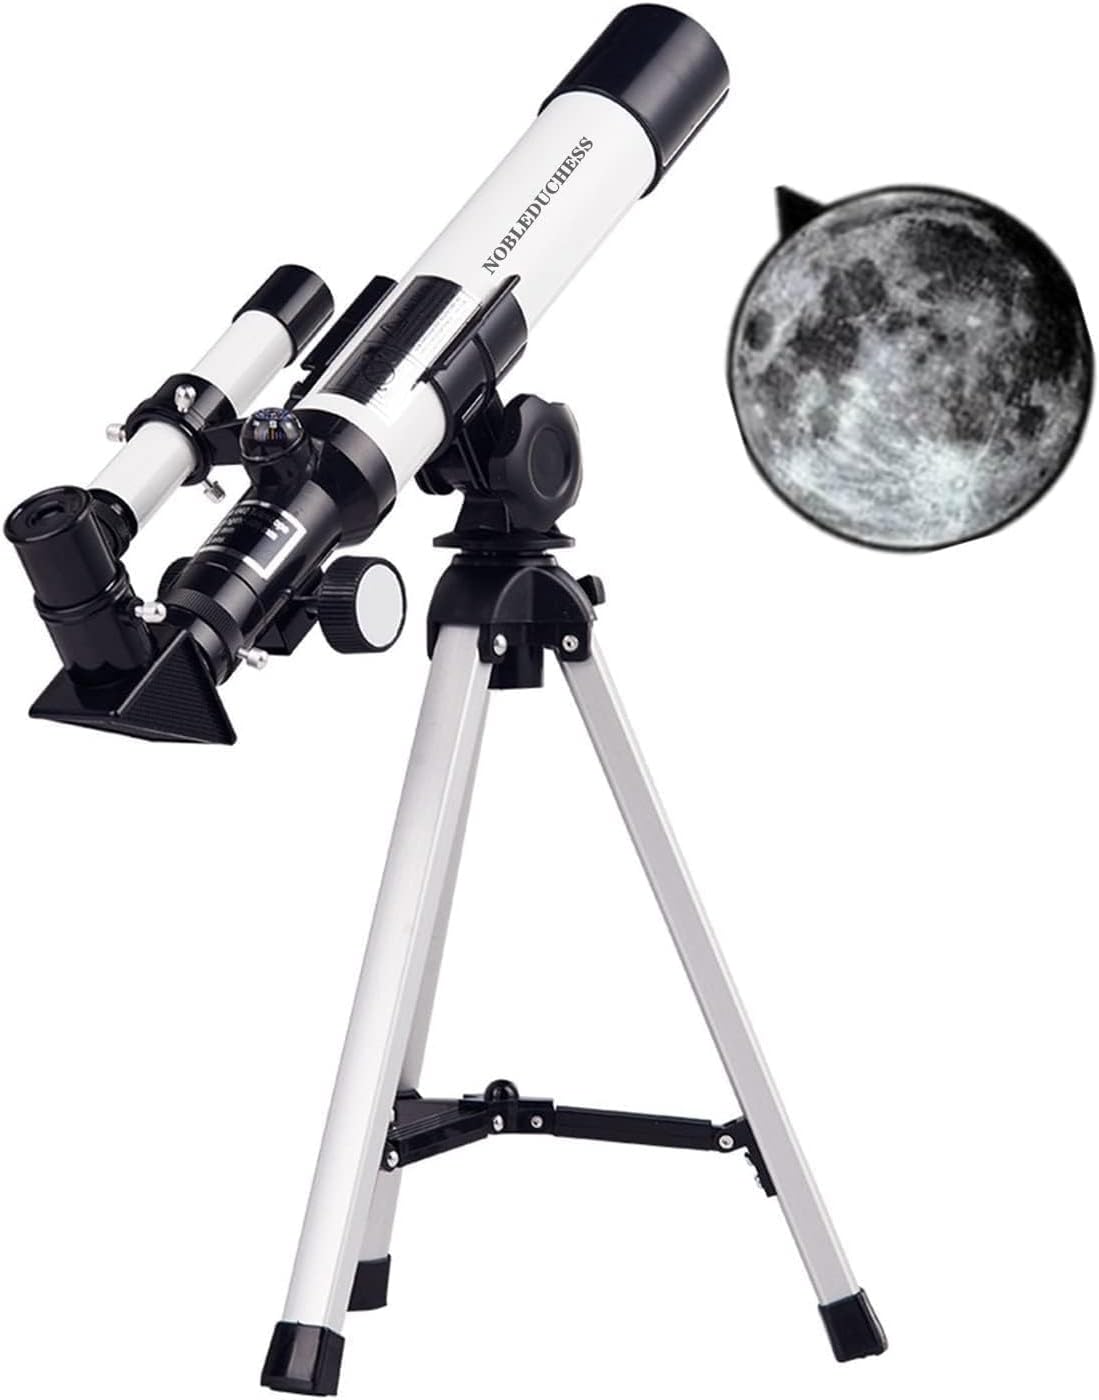 NOBLEDUCHESS Astronomical Telescope for Kids- Professional Stargazing HD Refractor Telescope 400mm Focal Length, High Magnification Astronomical Telescope to Observe Deep Space Stargazing